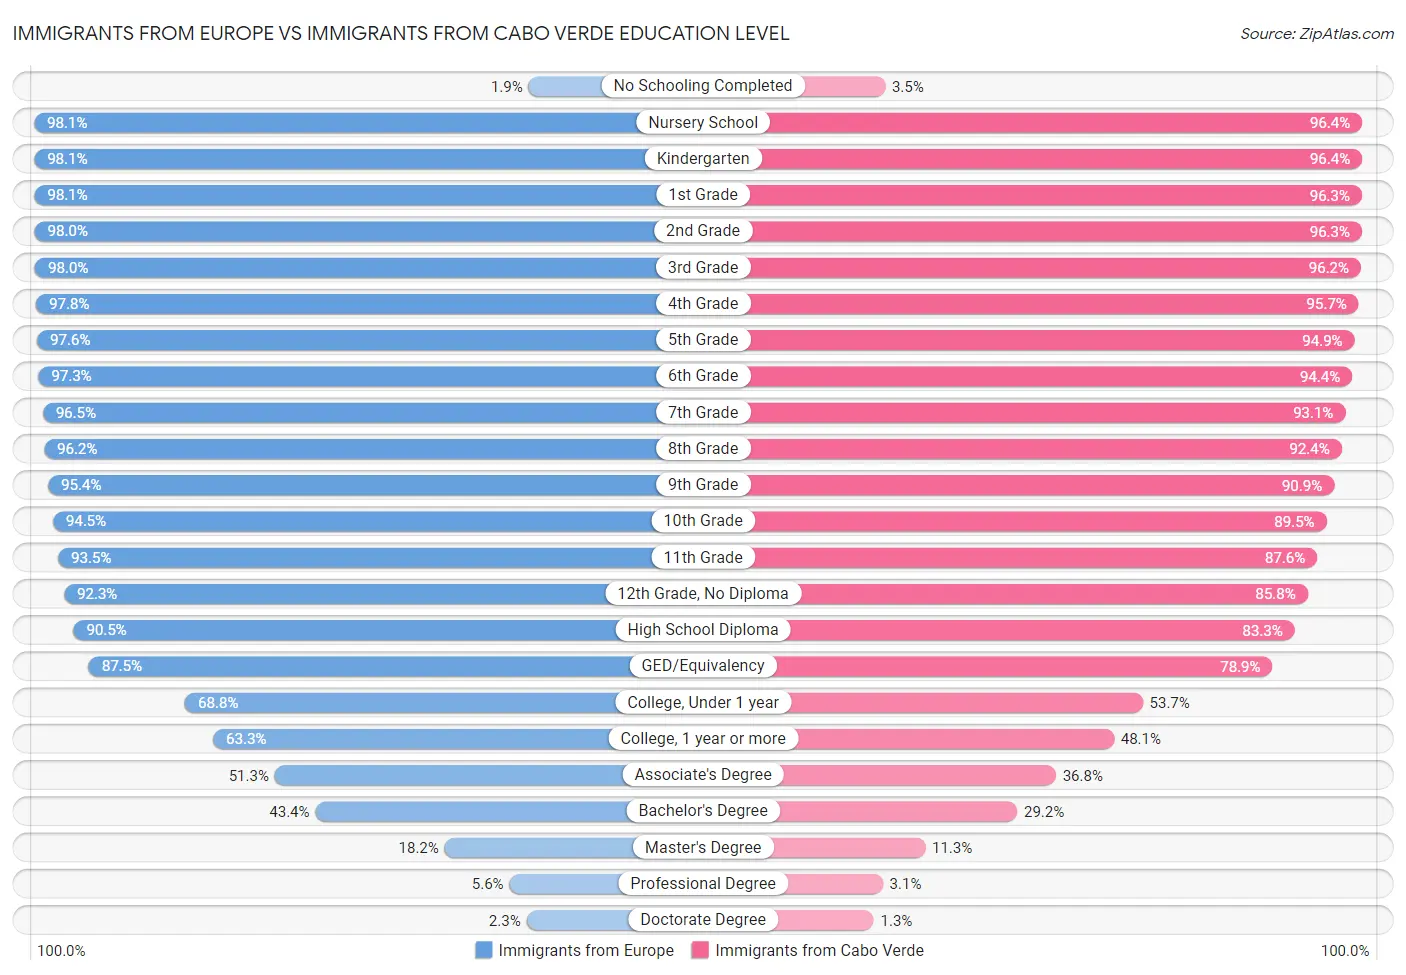 Immigrants from Europe vs Immigrants from Cabo Verde Education Level